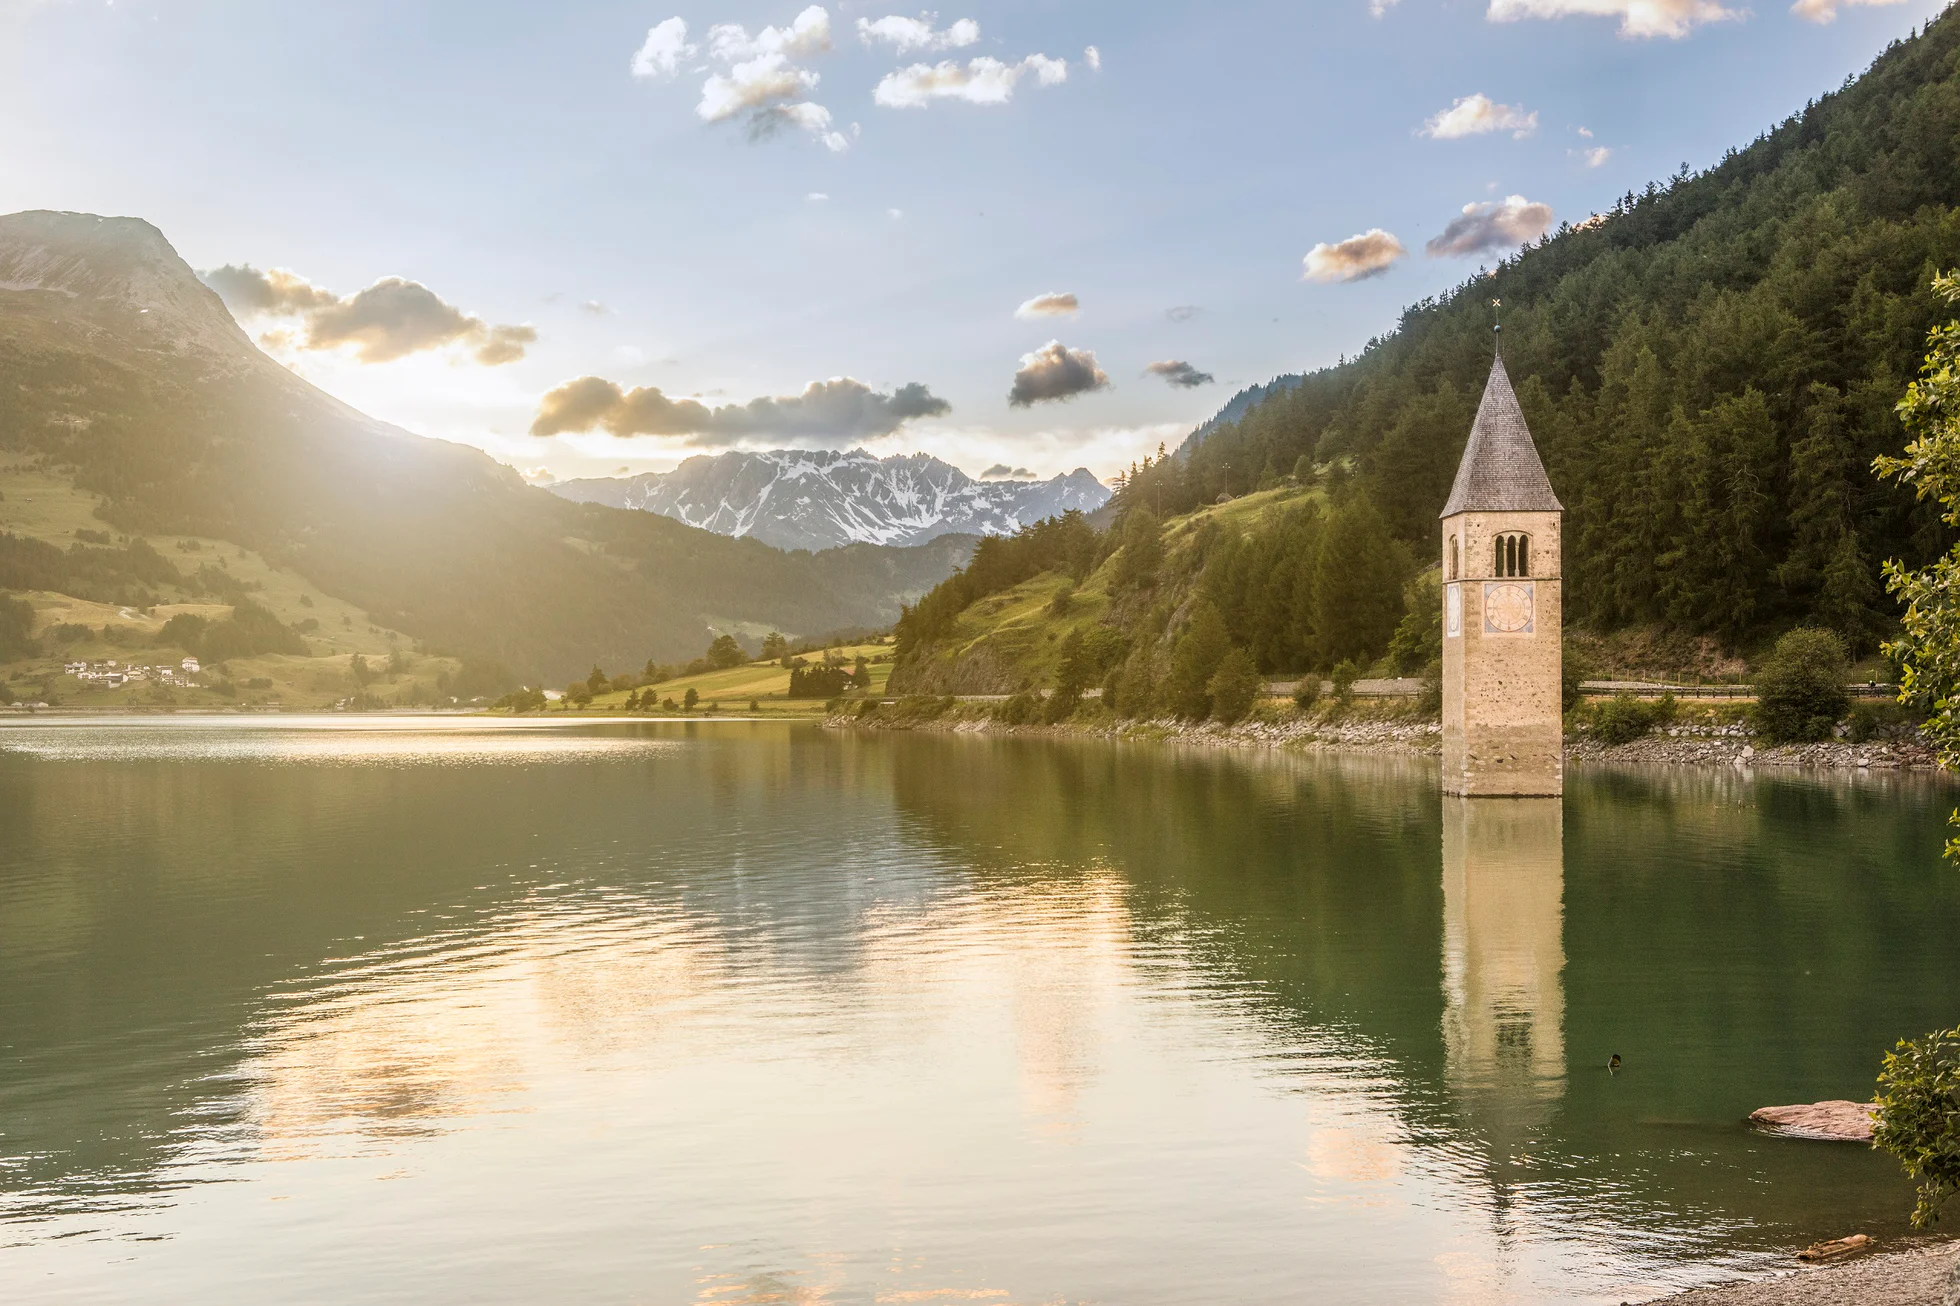 The Reschensee lake with its church spire in the submersed town of Alt-Graun.